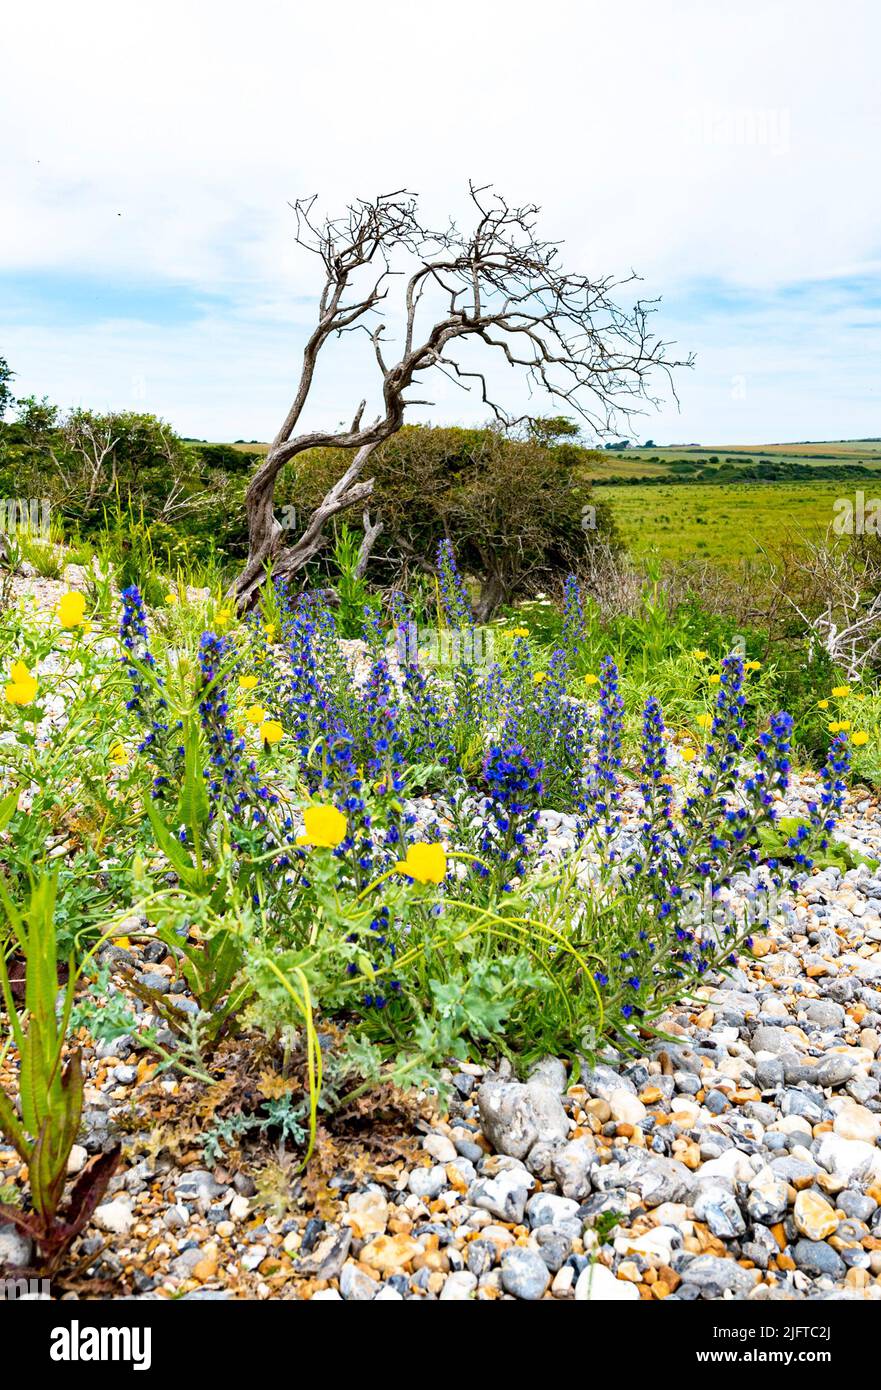 Cuckmere Haven & Seaford East Sussex England UK - Yellow horned poppy ( Glaucium flavum)  flowers and a small dead tree Stock Photo